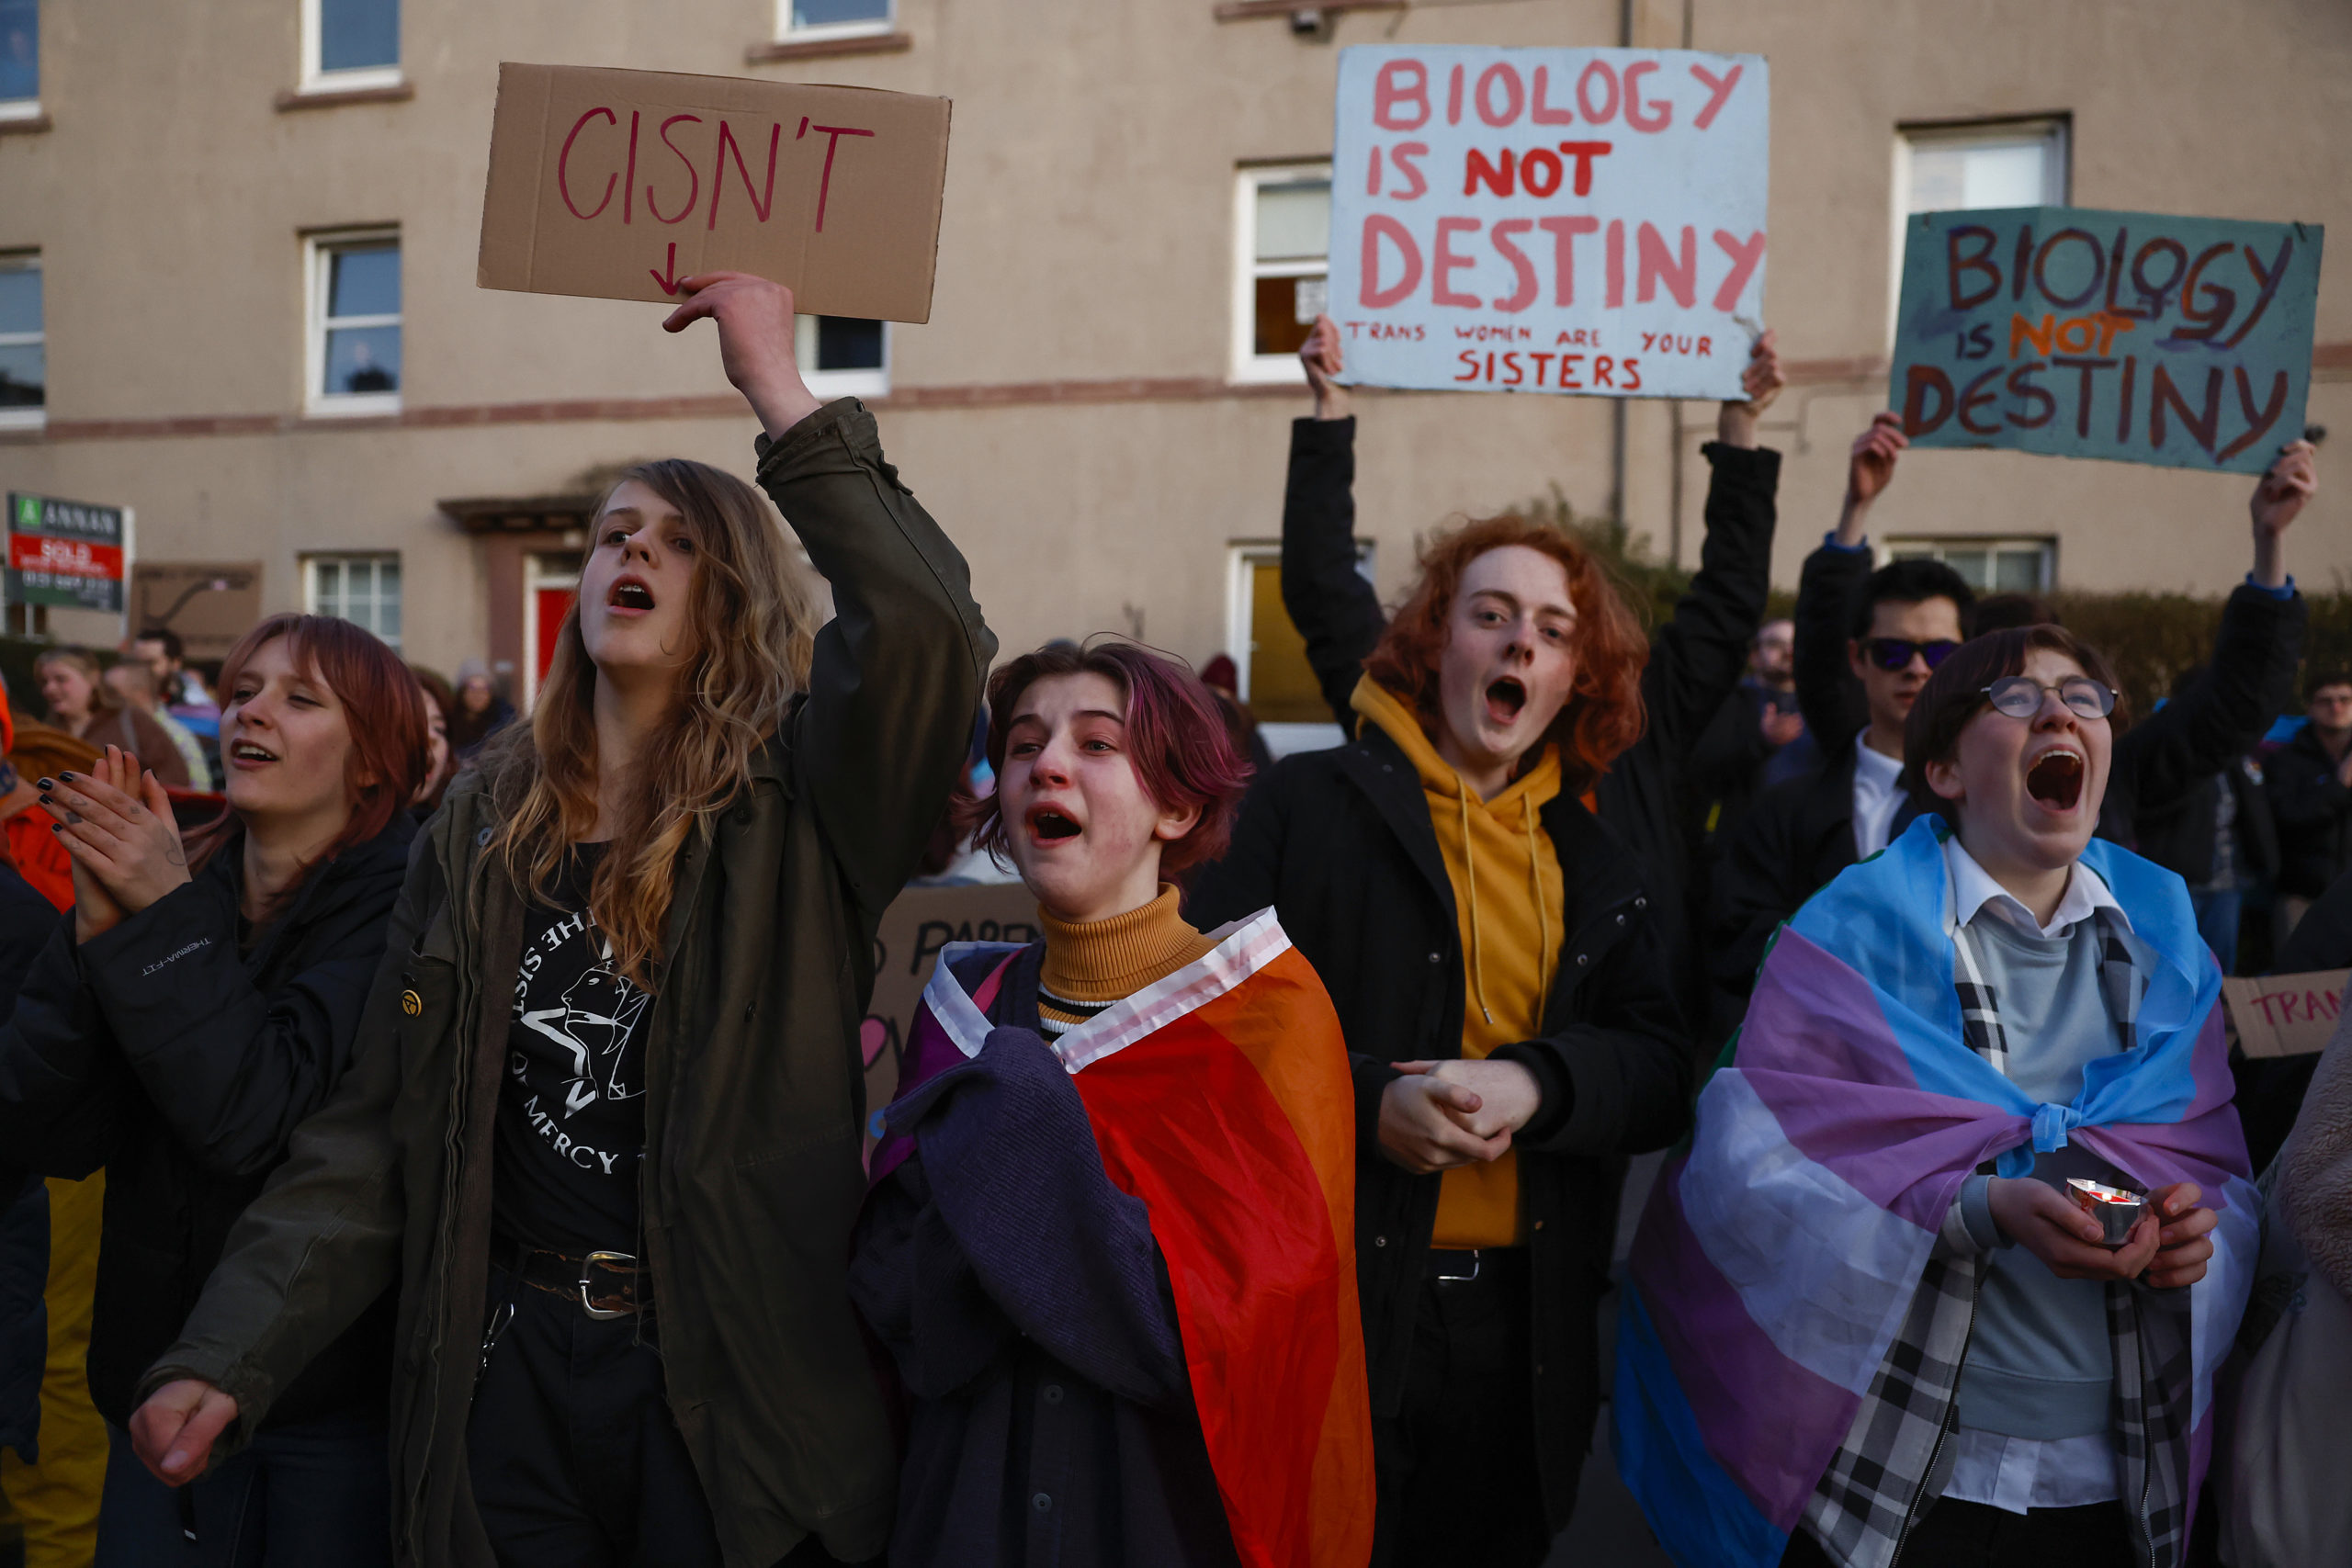 EDINBURGH, SCOTLAND - MARCH 14: Trans rights activists protest at a Gender Identity Talk held at Portobello Library on March 14, 2023 in Edinburgh, Scotland. Concerned Adults Talking Openly About Gender Identity Ideology hold a meeting on Gender Identity today which has previously prompted anger among trans activists. (Photo by Jeff J Mitchell/Getty Images)